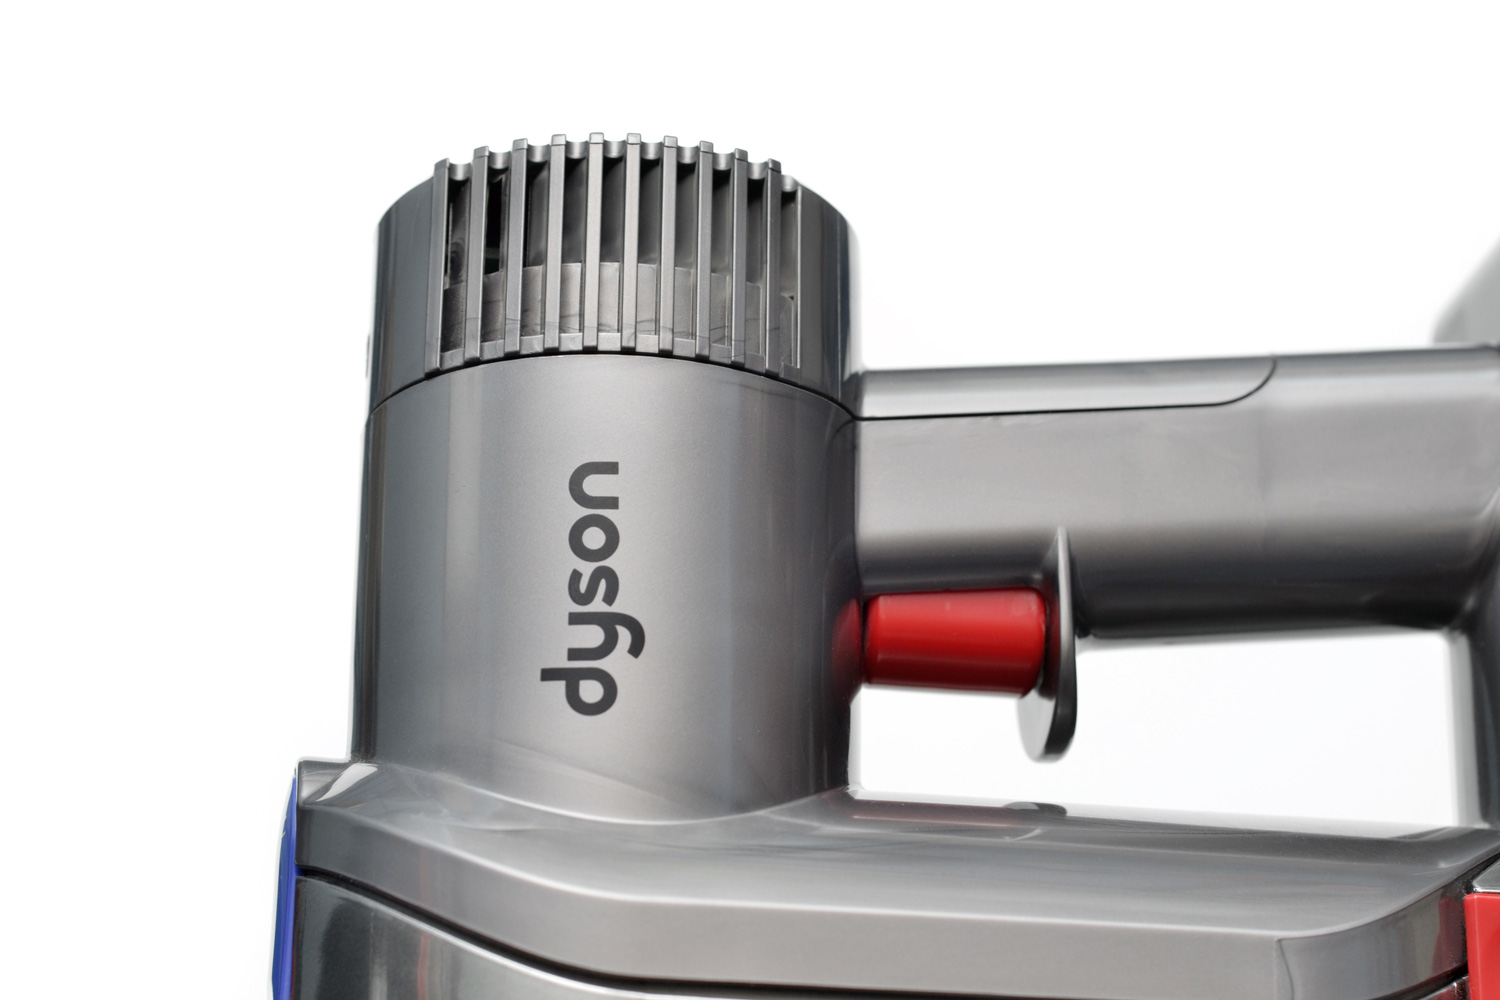 Close up of a Dyson vacuum cleaner against a white background